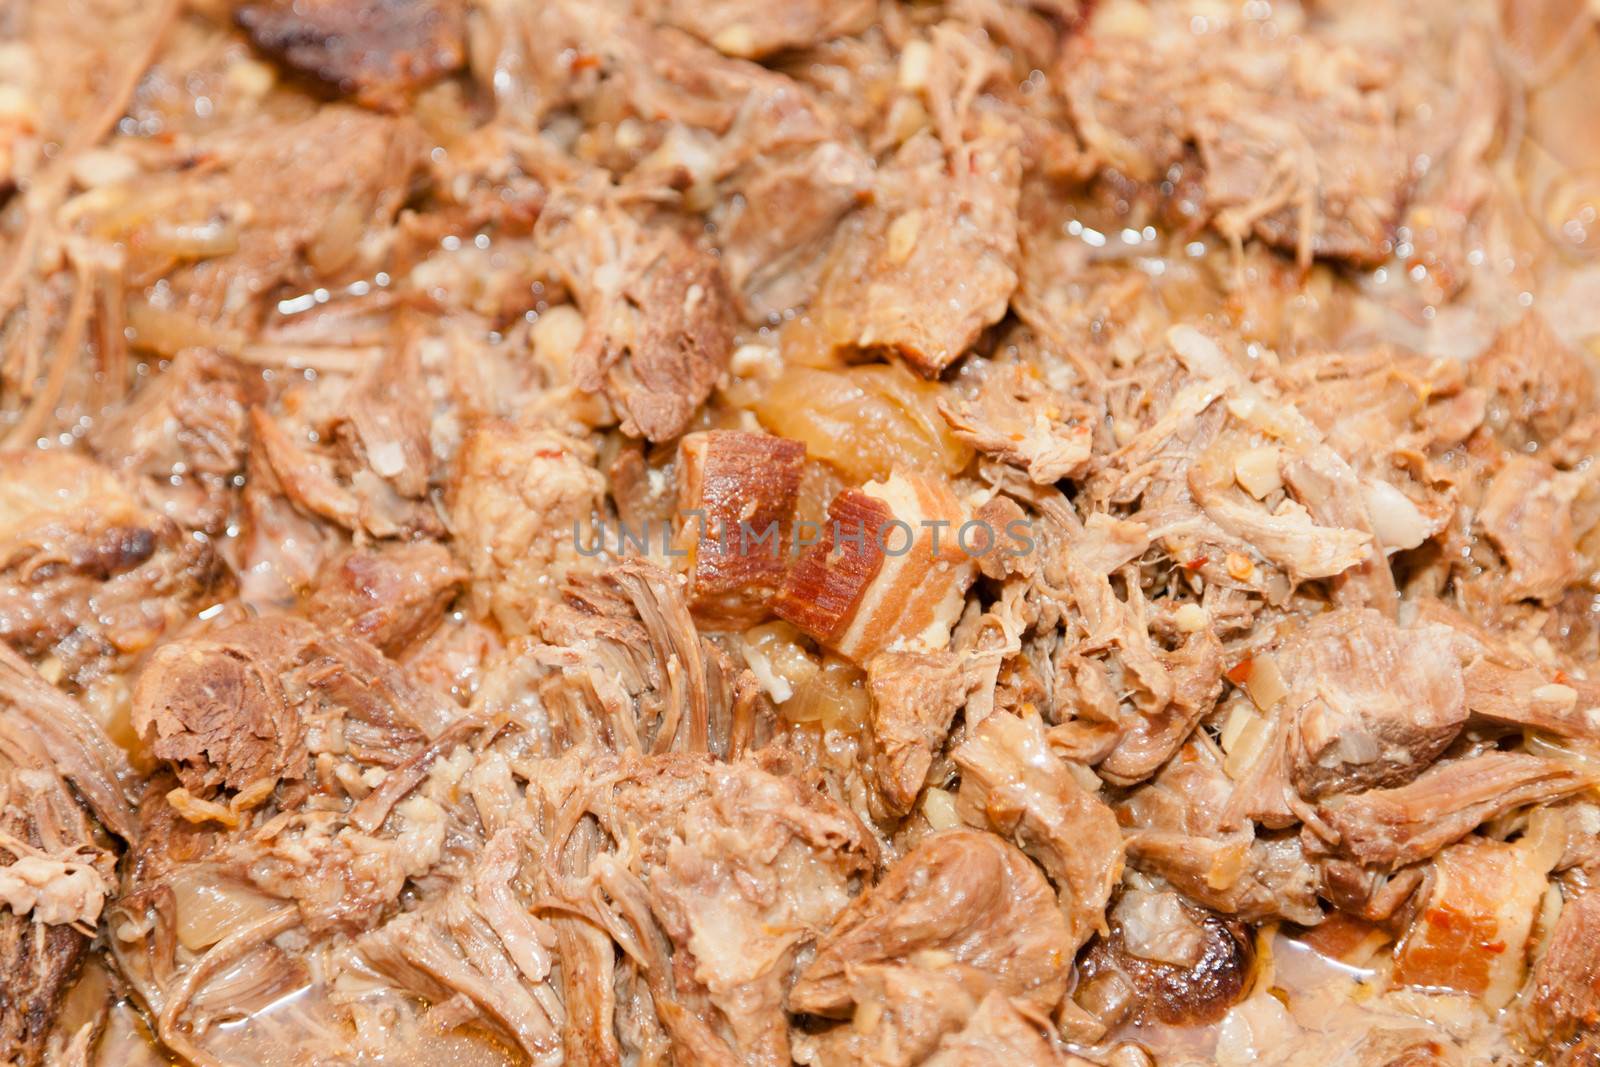 Traditional Mexican shredded beef.It is basically beef that has been marinated, cooked, shredded and dried.